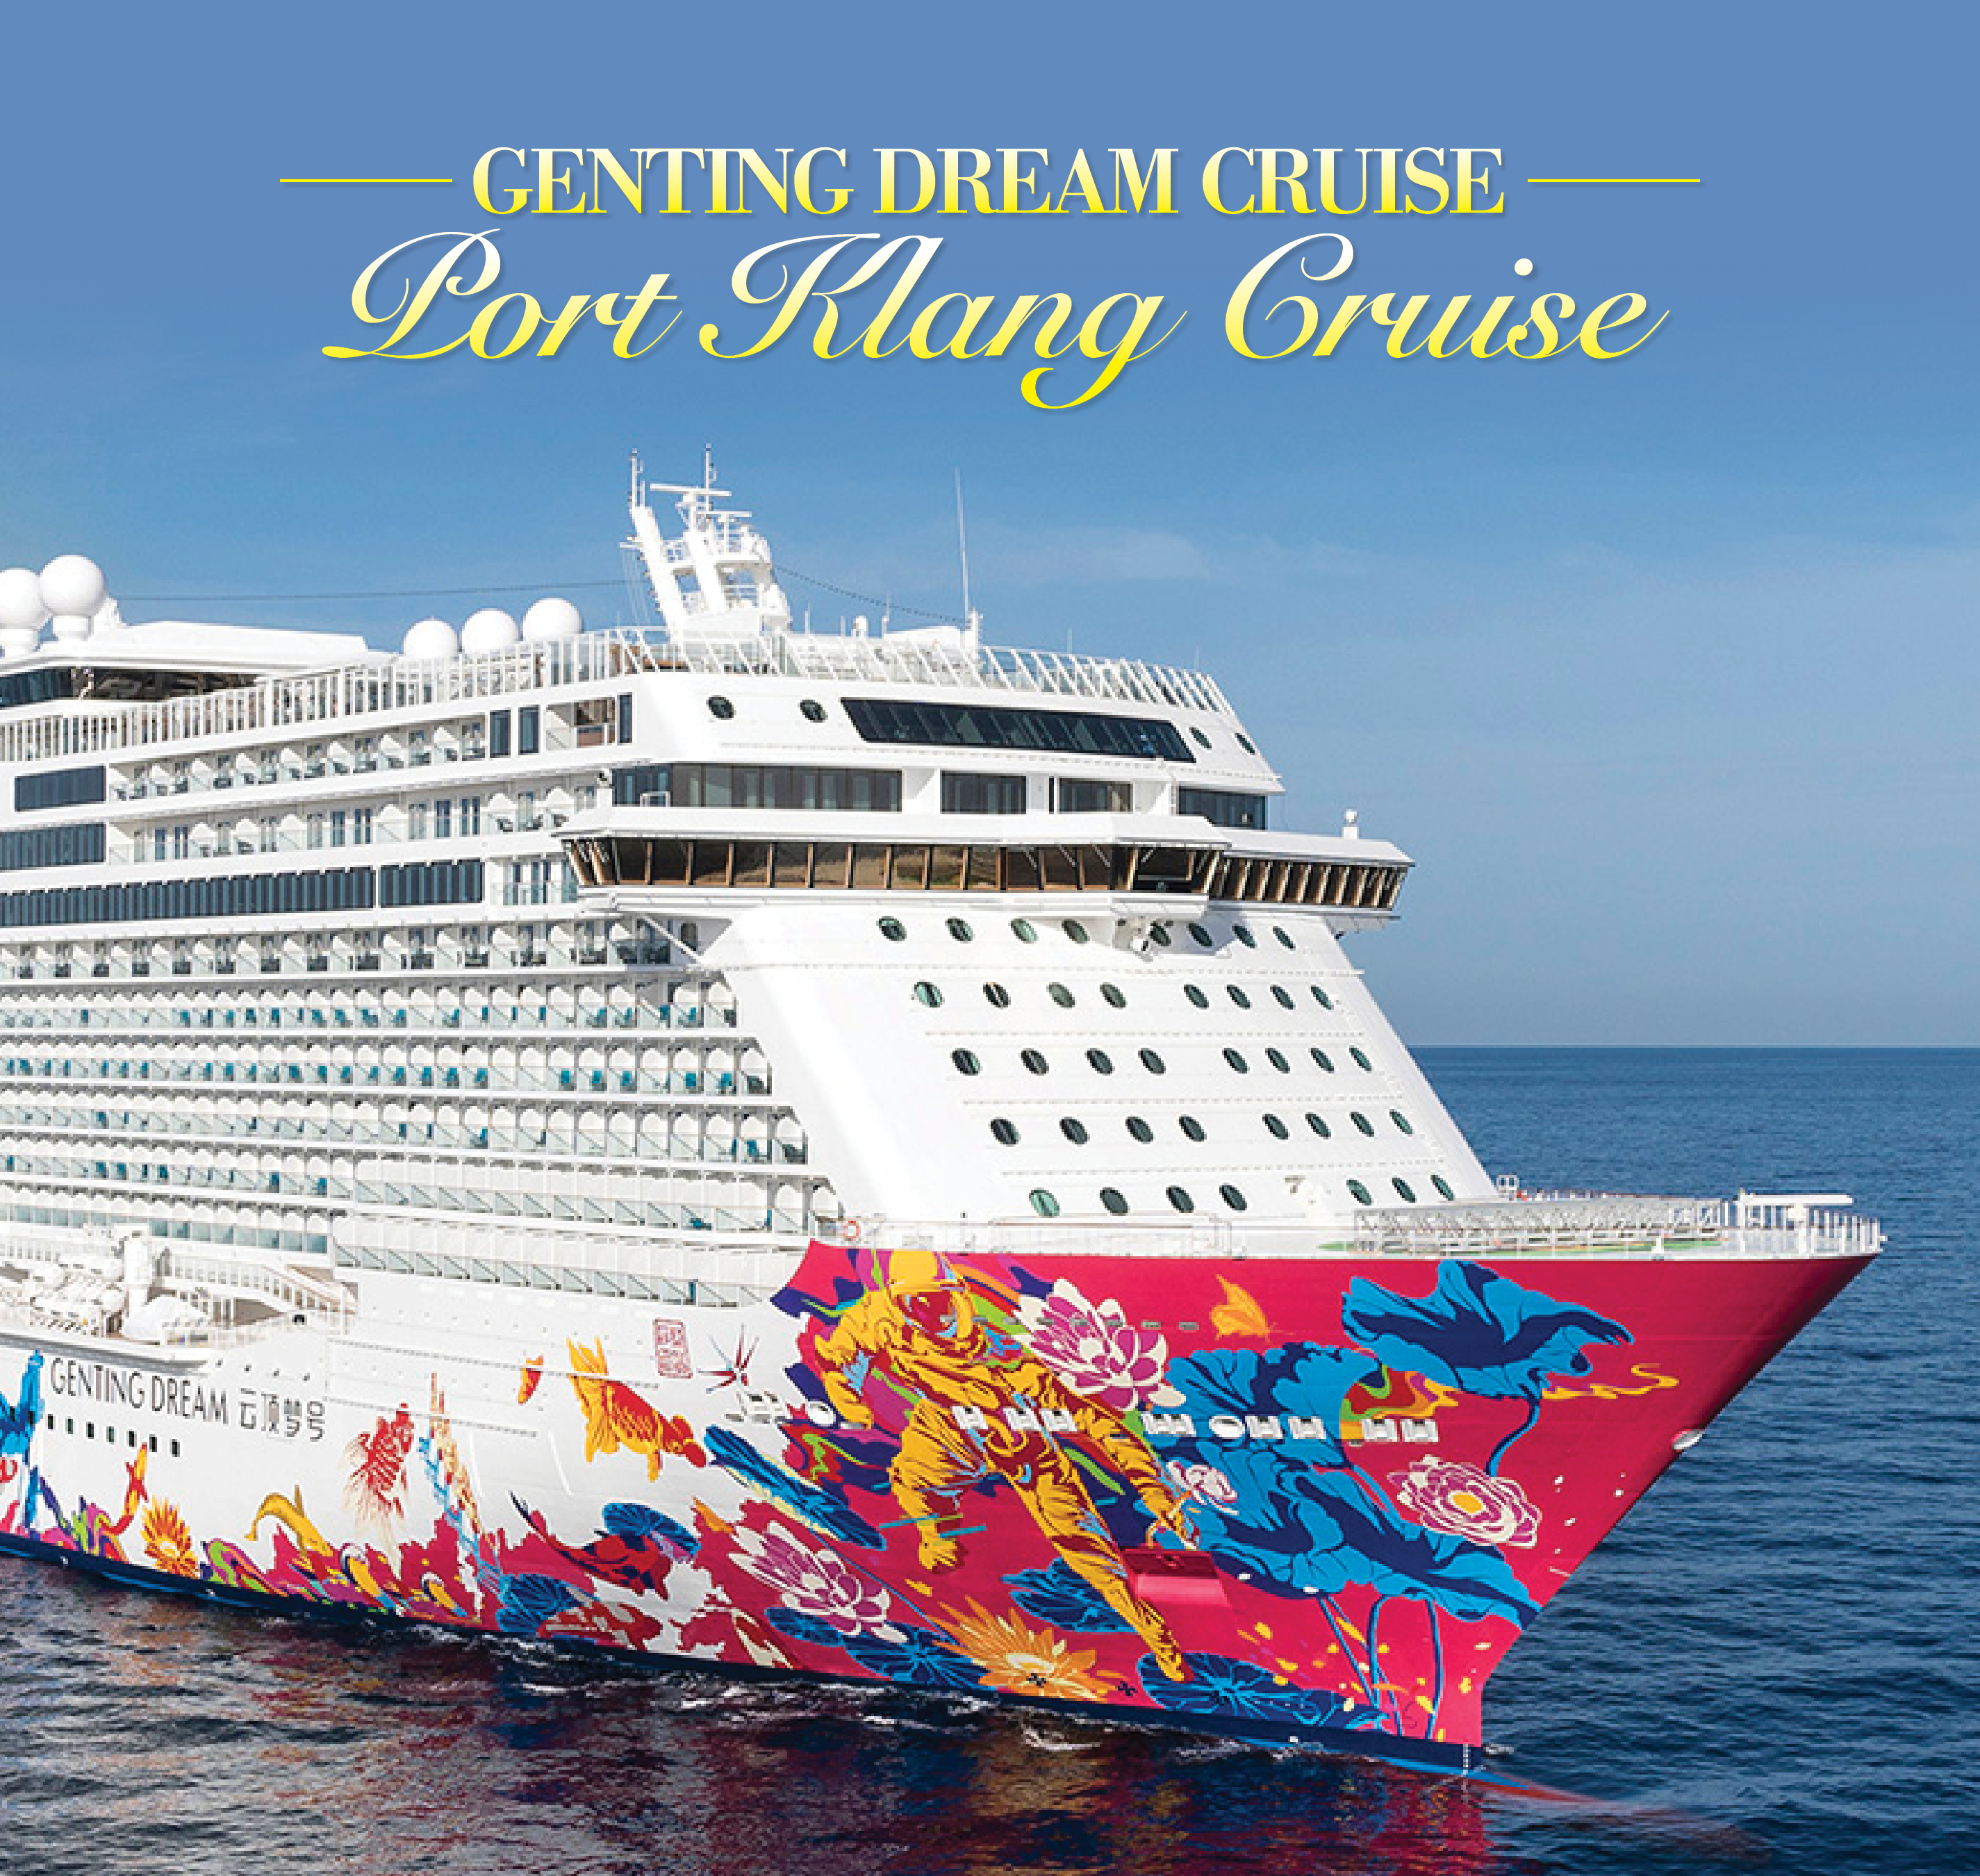 2 Nights Cruise, Port Klang Cruise - Great India Tour Company